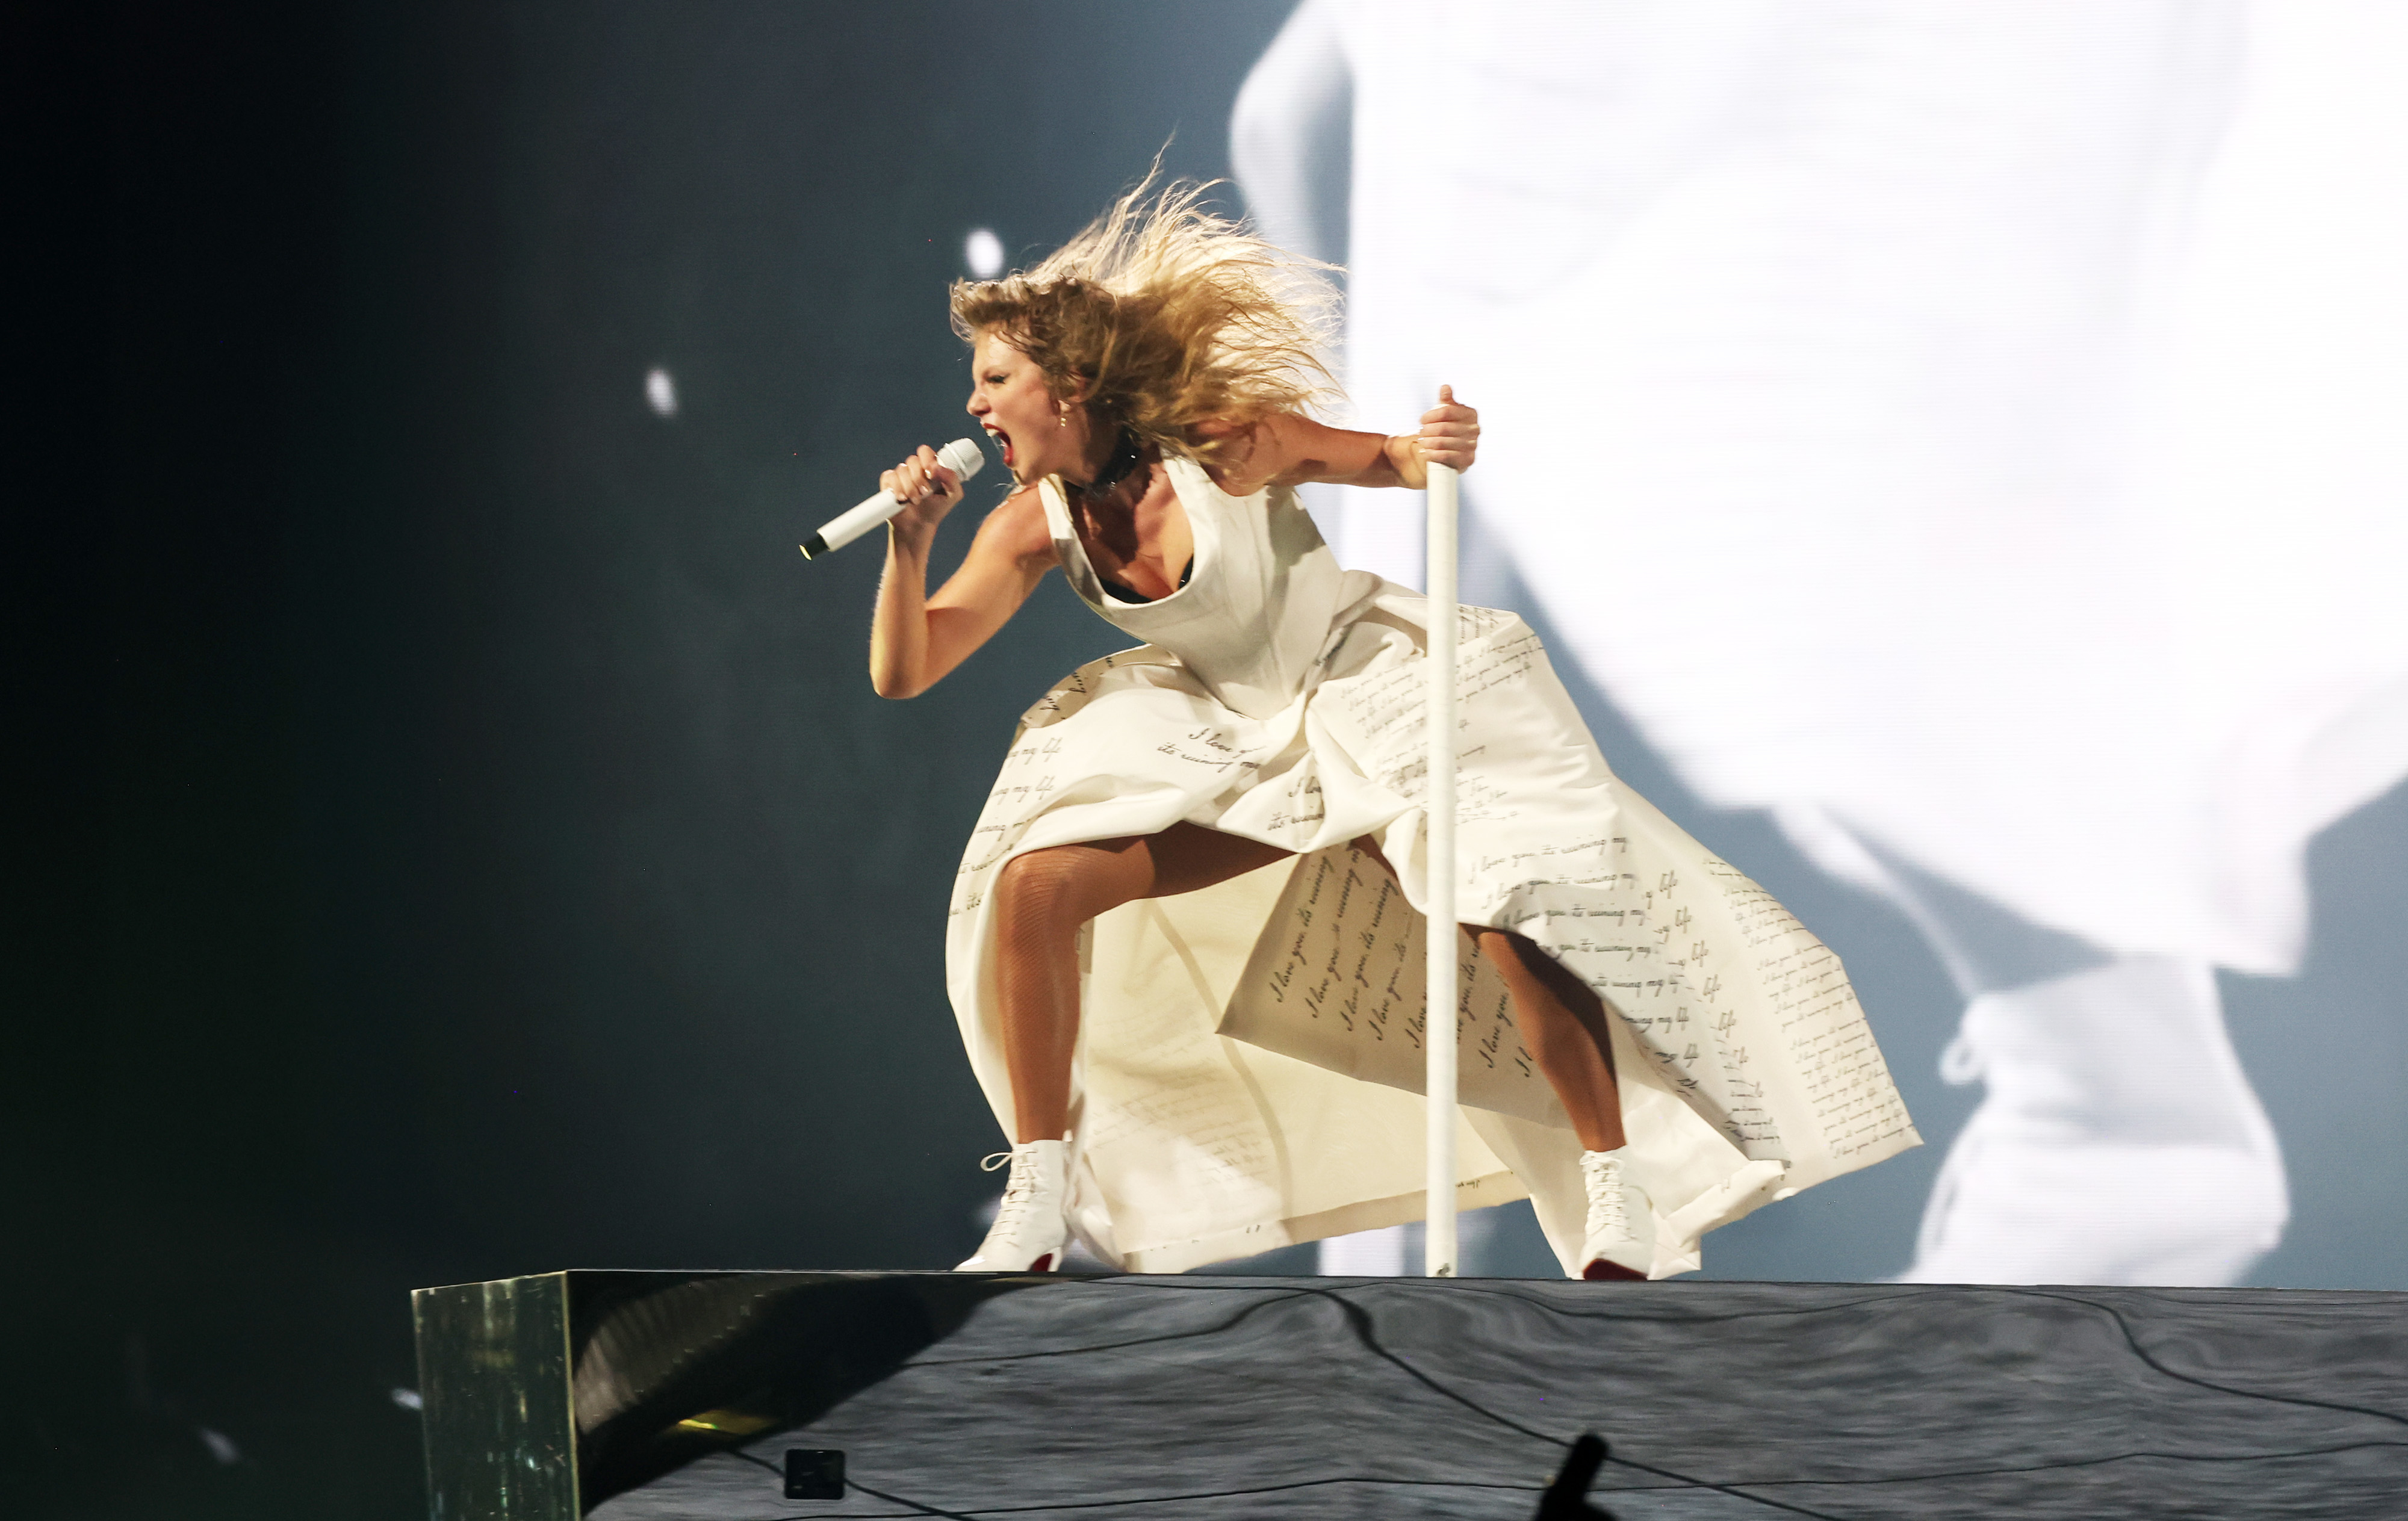 Taylor on levitating platform on stage singing into a microphone, wearing a dramatic, flowing dress with sheet music print